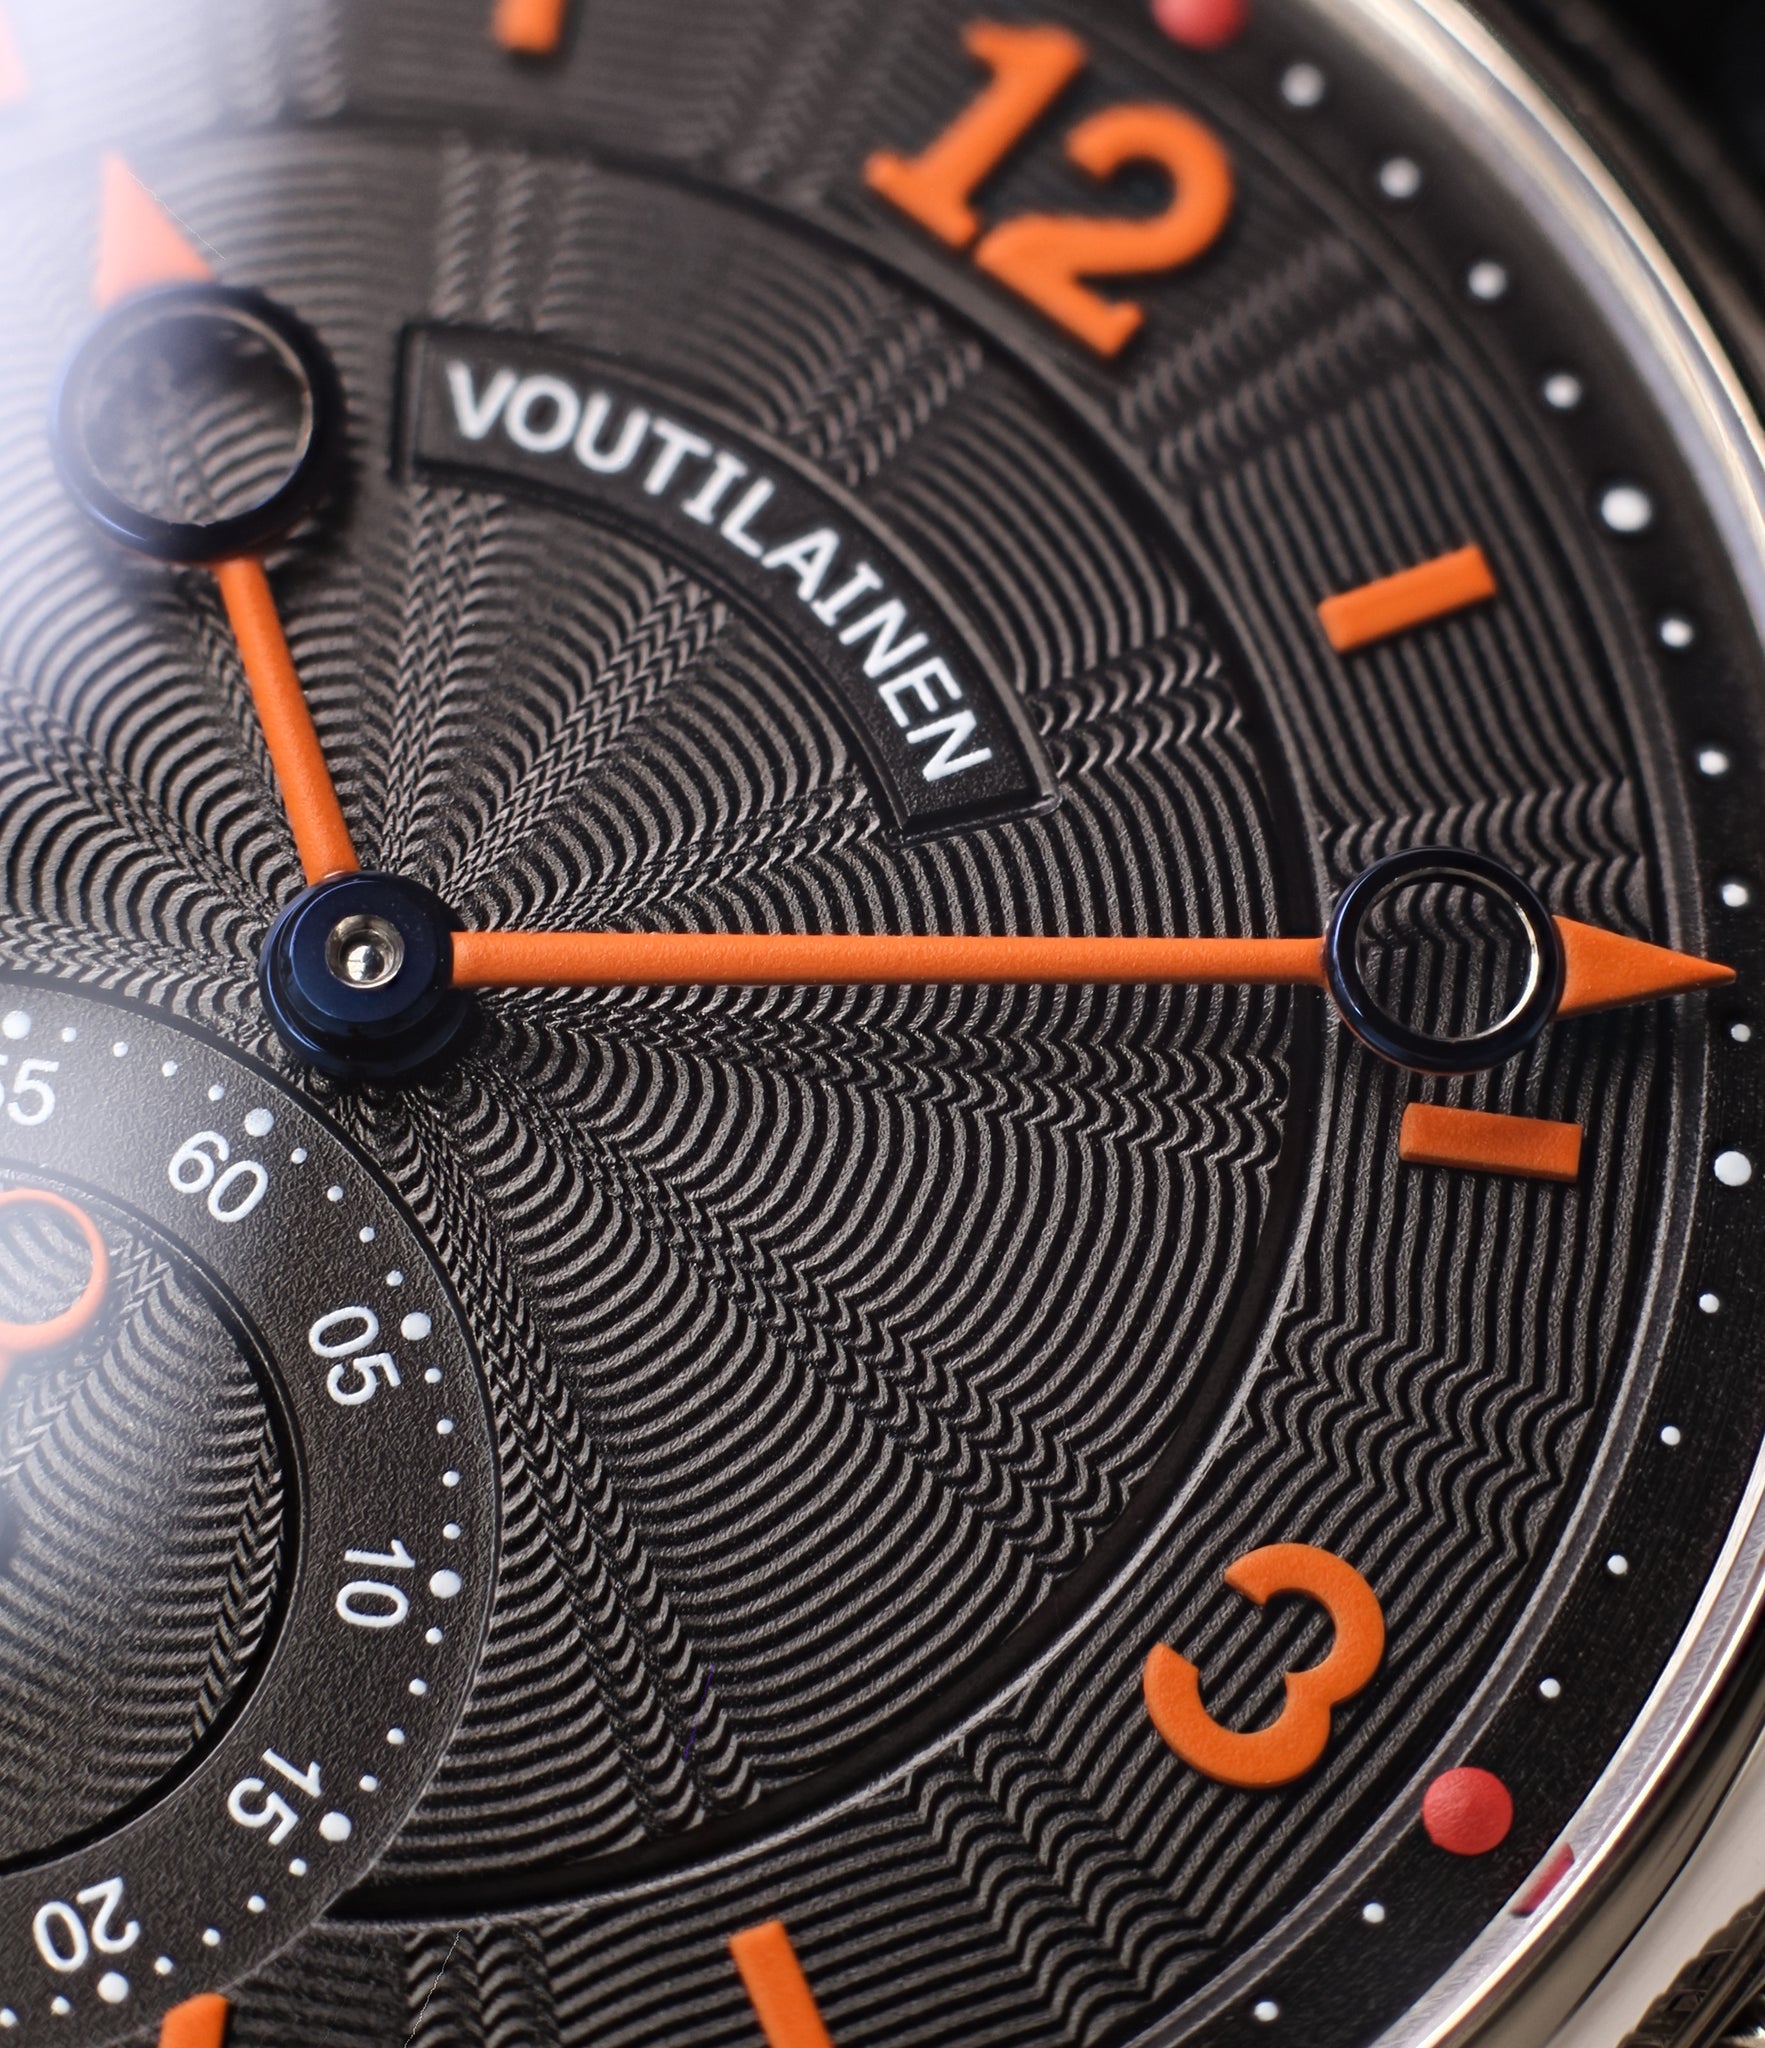 black dial orange numerals Kari Voutilainen Vingt-8 Cal. 28 two substitute dial white gold watch for sale online at a Collected Man online specialist platform for independent watchmakers 